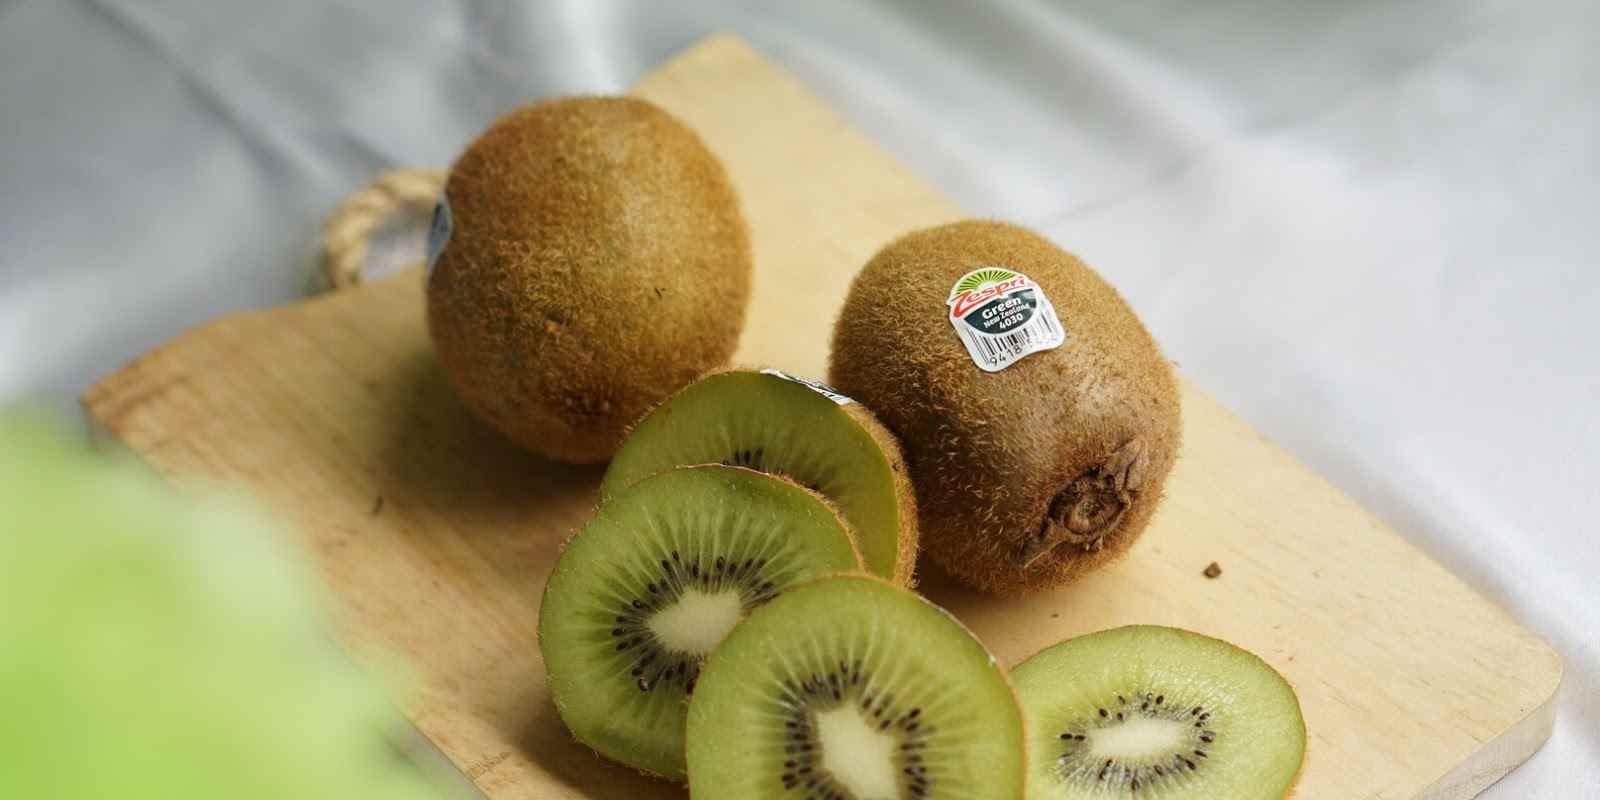  The Price of Green Kiwi + Purchase and Sale of Green Kiwi Wholesale 